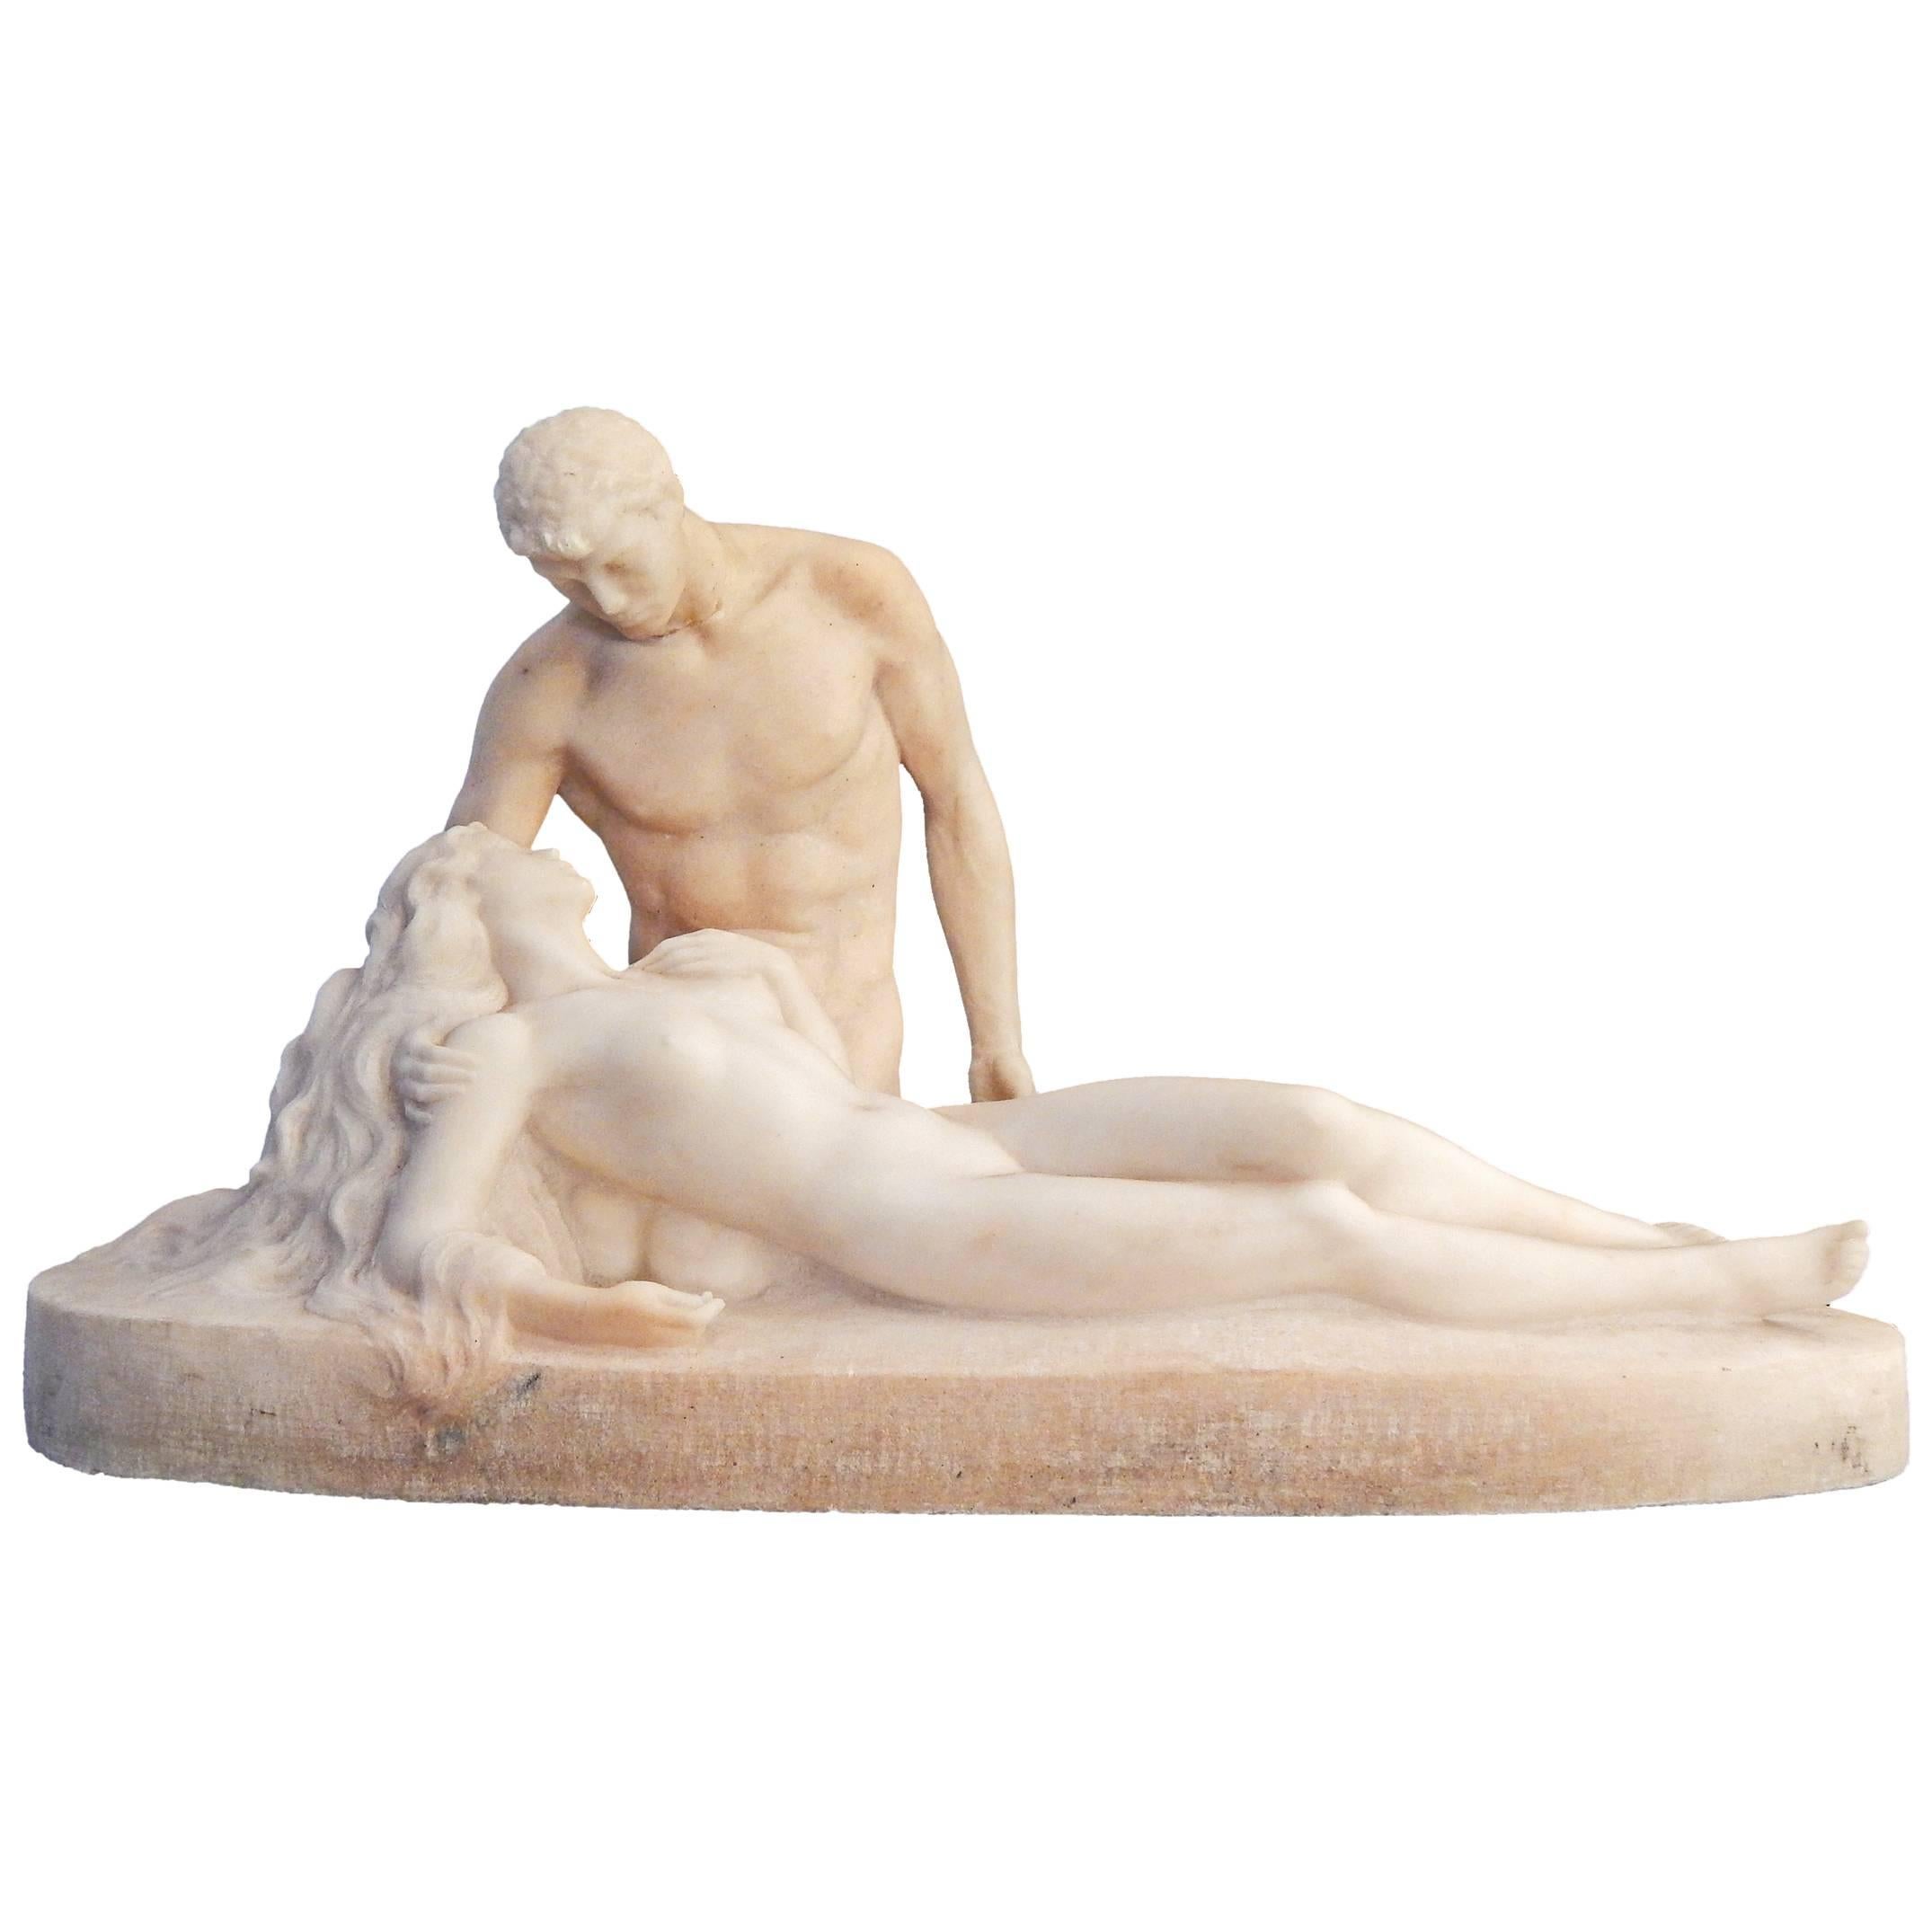 "Eternal Springtime, " Romantic Antique Sculpture in Marble with Nudes by Kalish For Sale